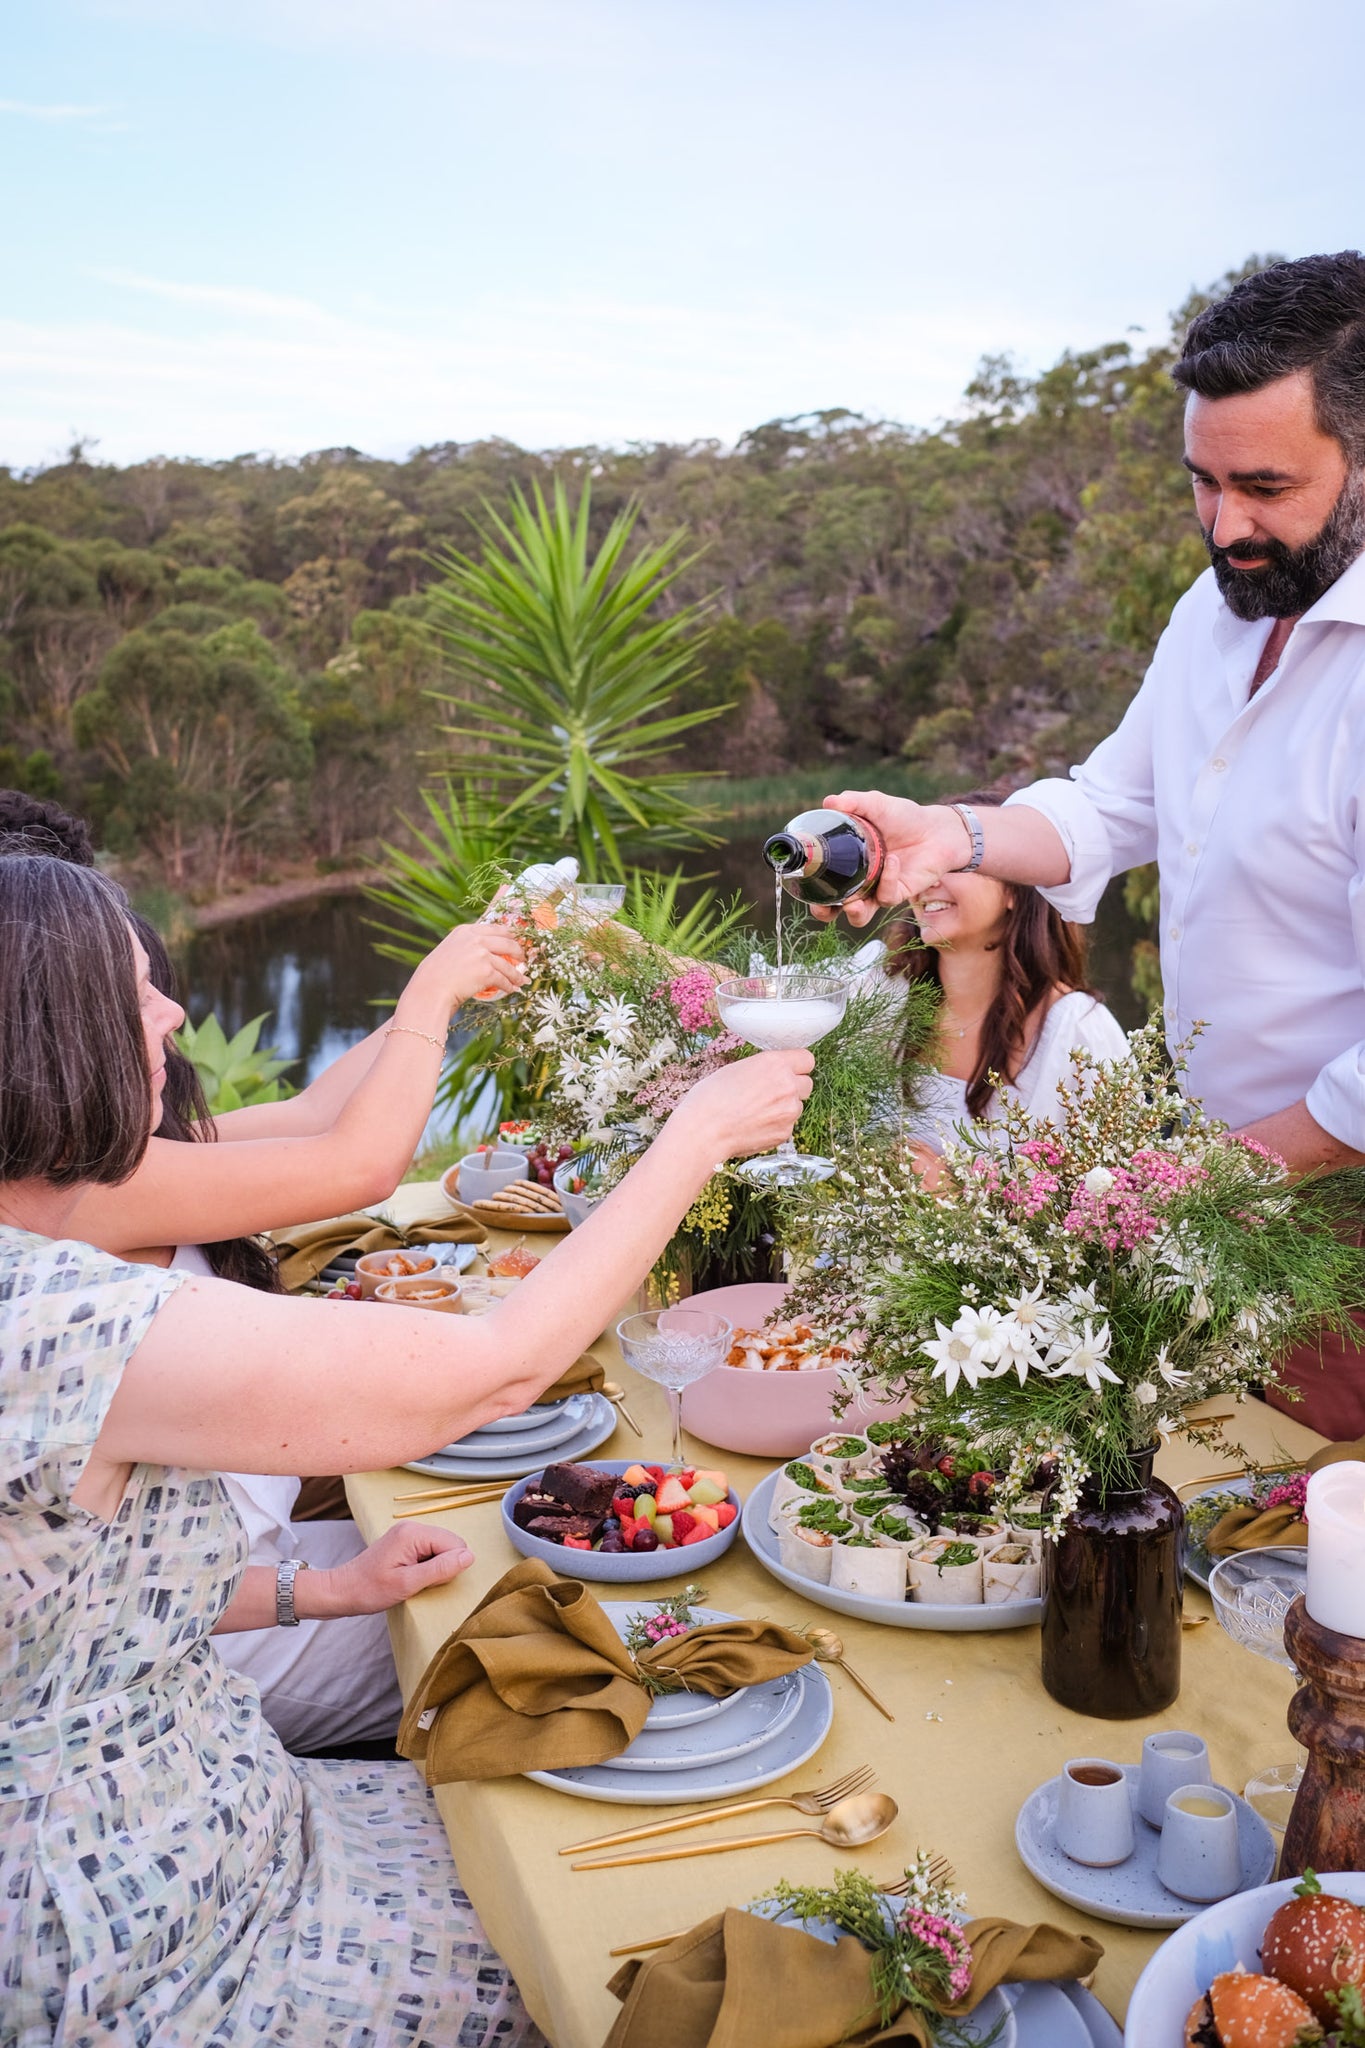 Man pouring Mumm Champagne at a summer outdoor dining event by Palinopsia Ceramics